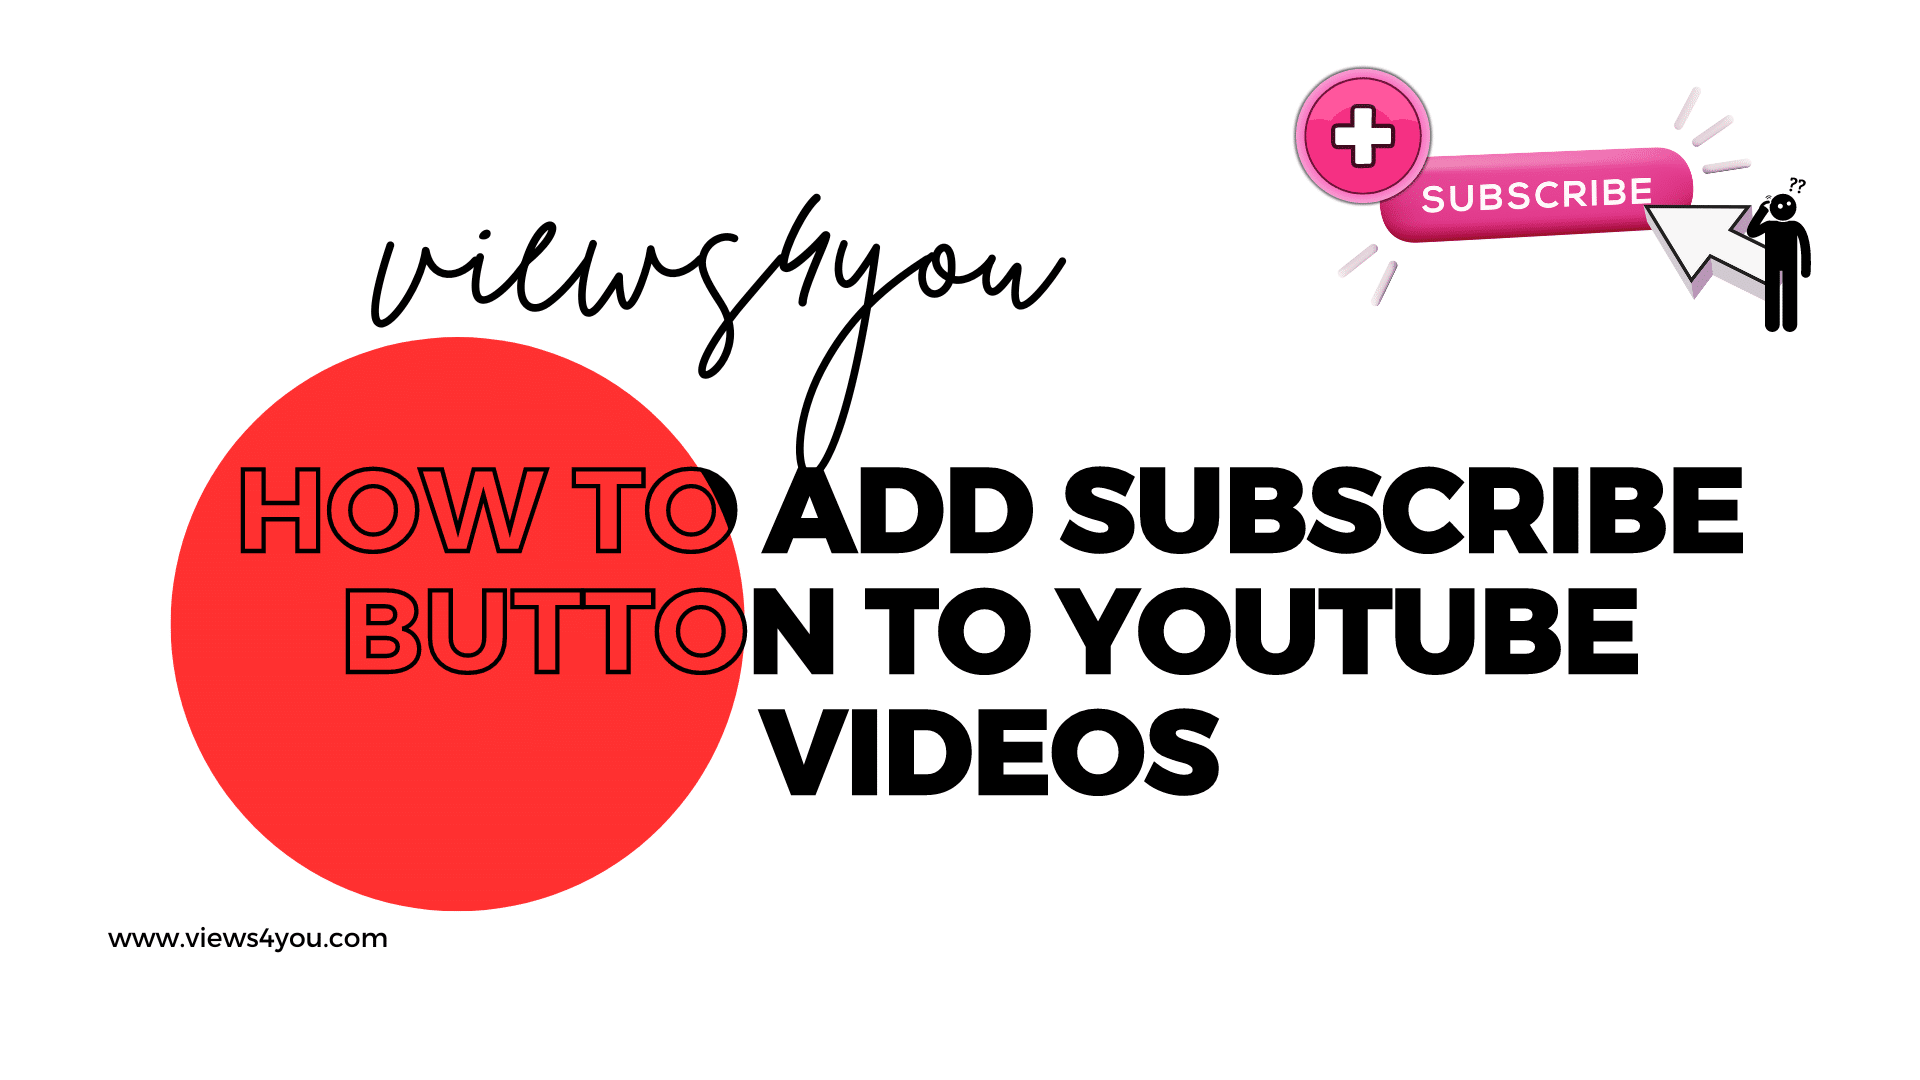 How To Add A Subscribe Button To YouTube Videos